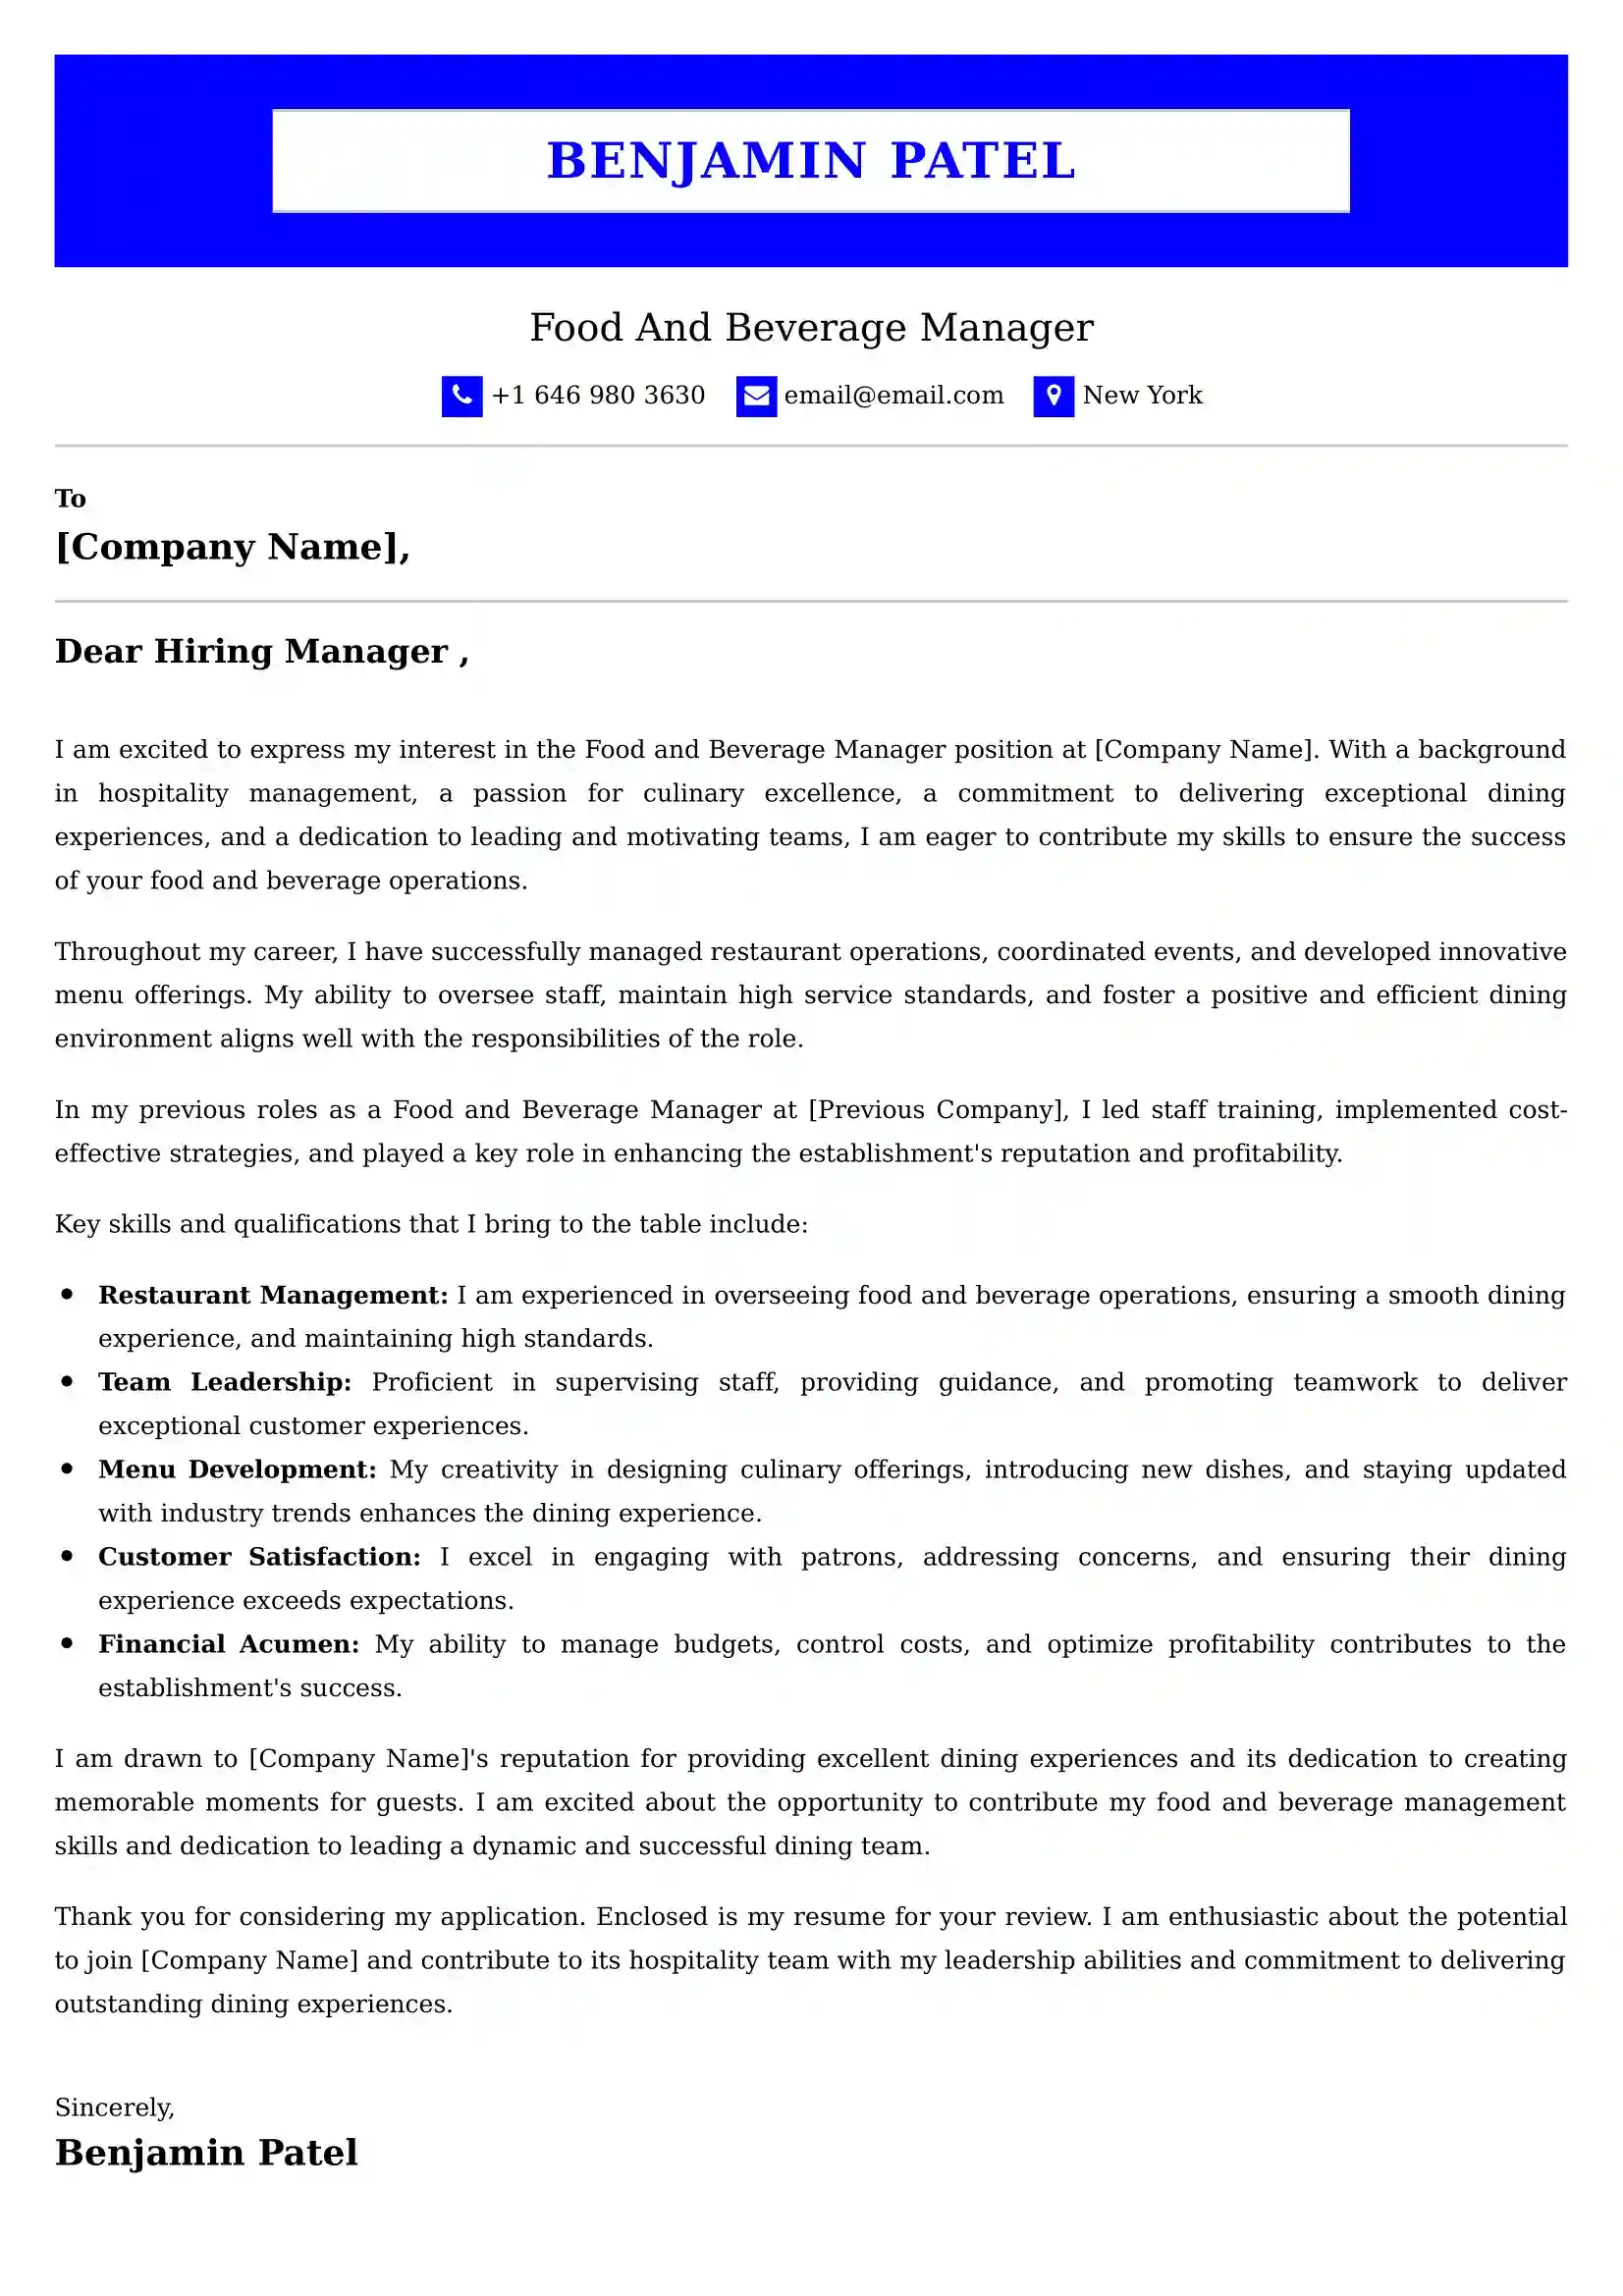 Food And Beverage Manager Cover Letter Sample